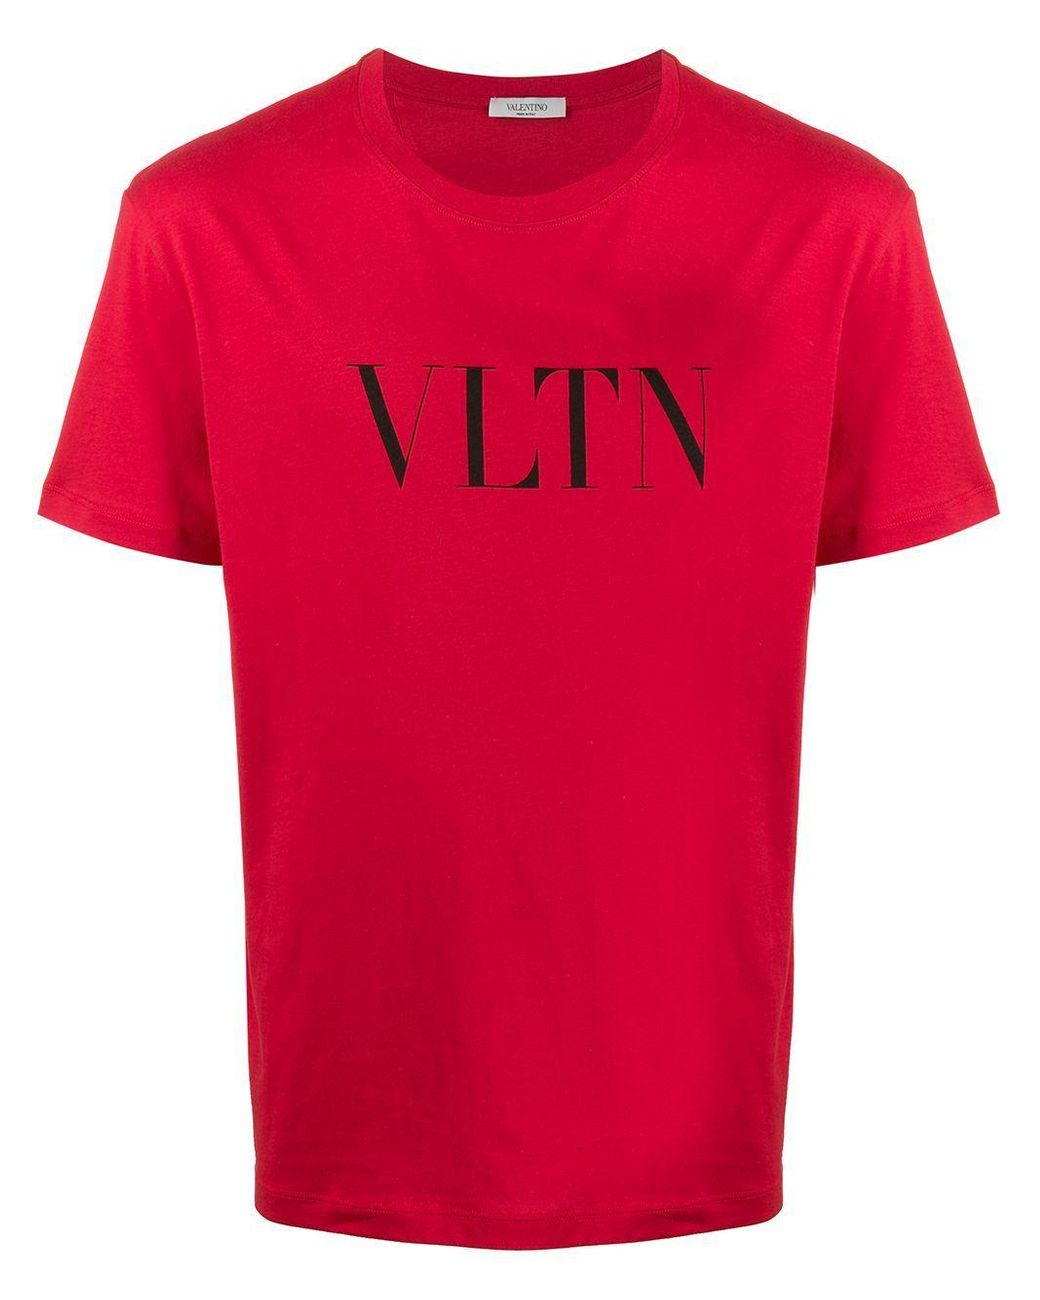 Valentino Cotton T-shirt in Red for Men - Lyst